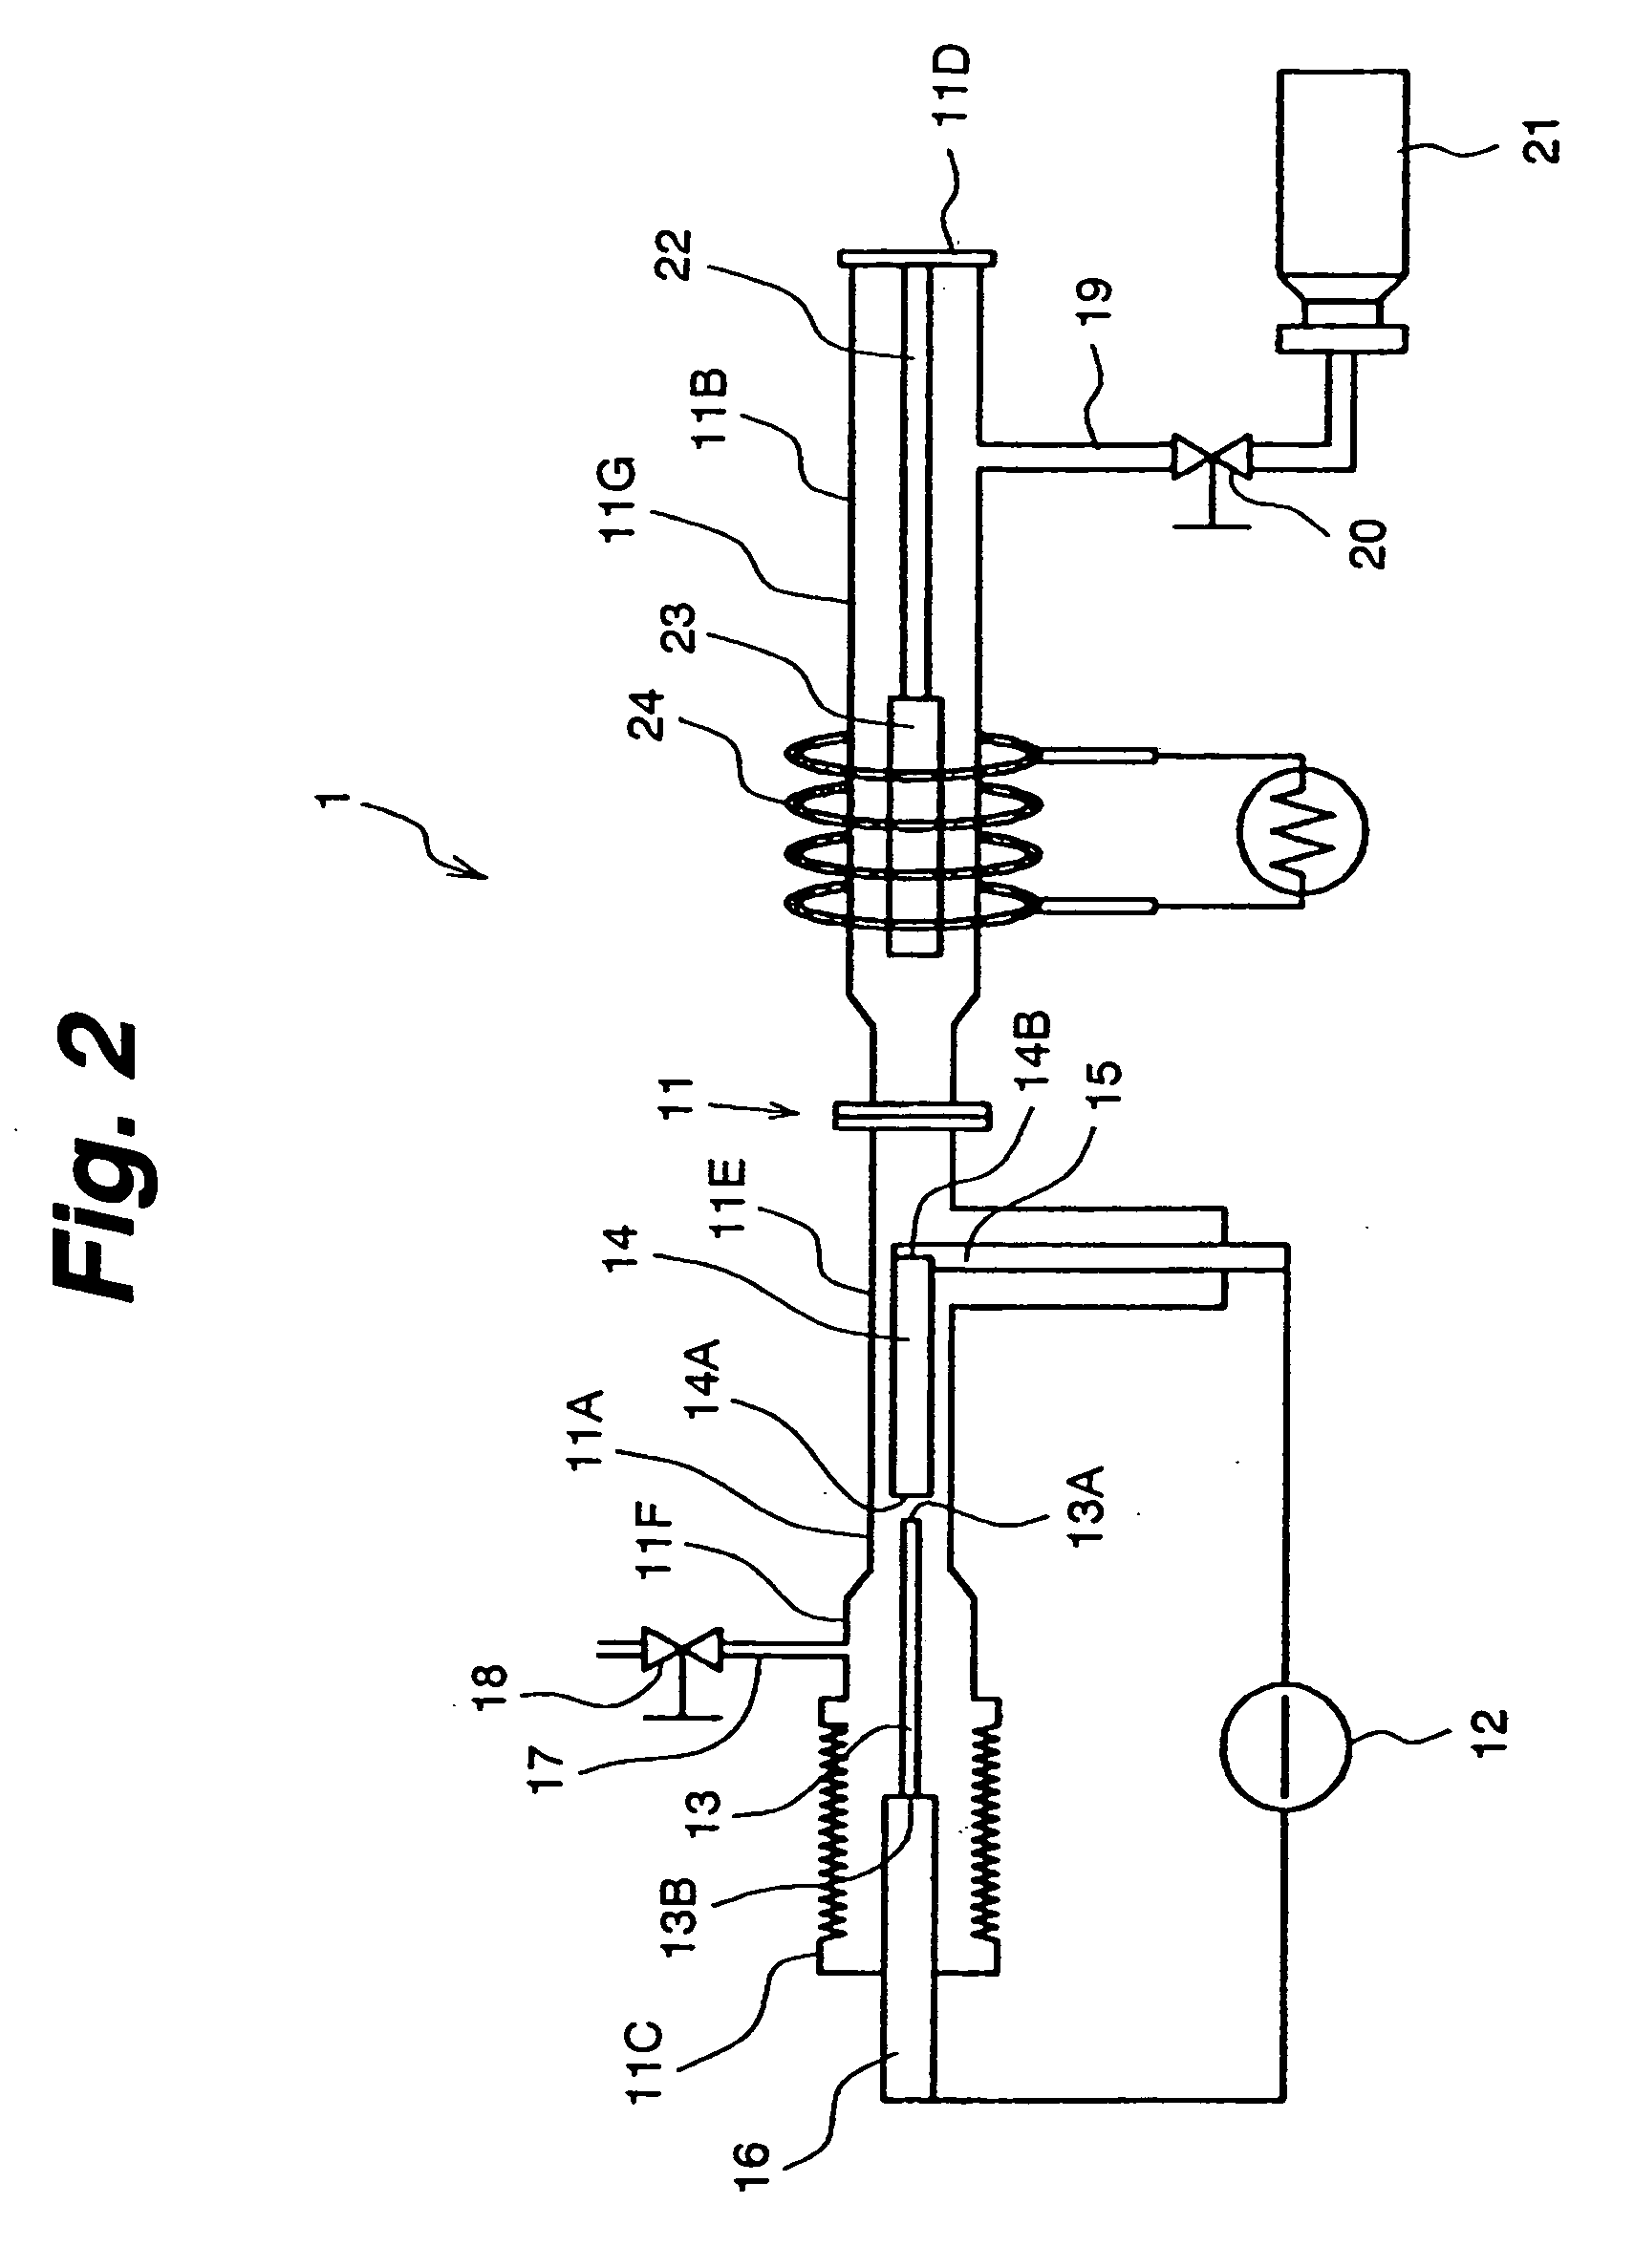 Device and method for manufacture of carbonaceous material